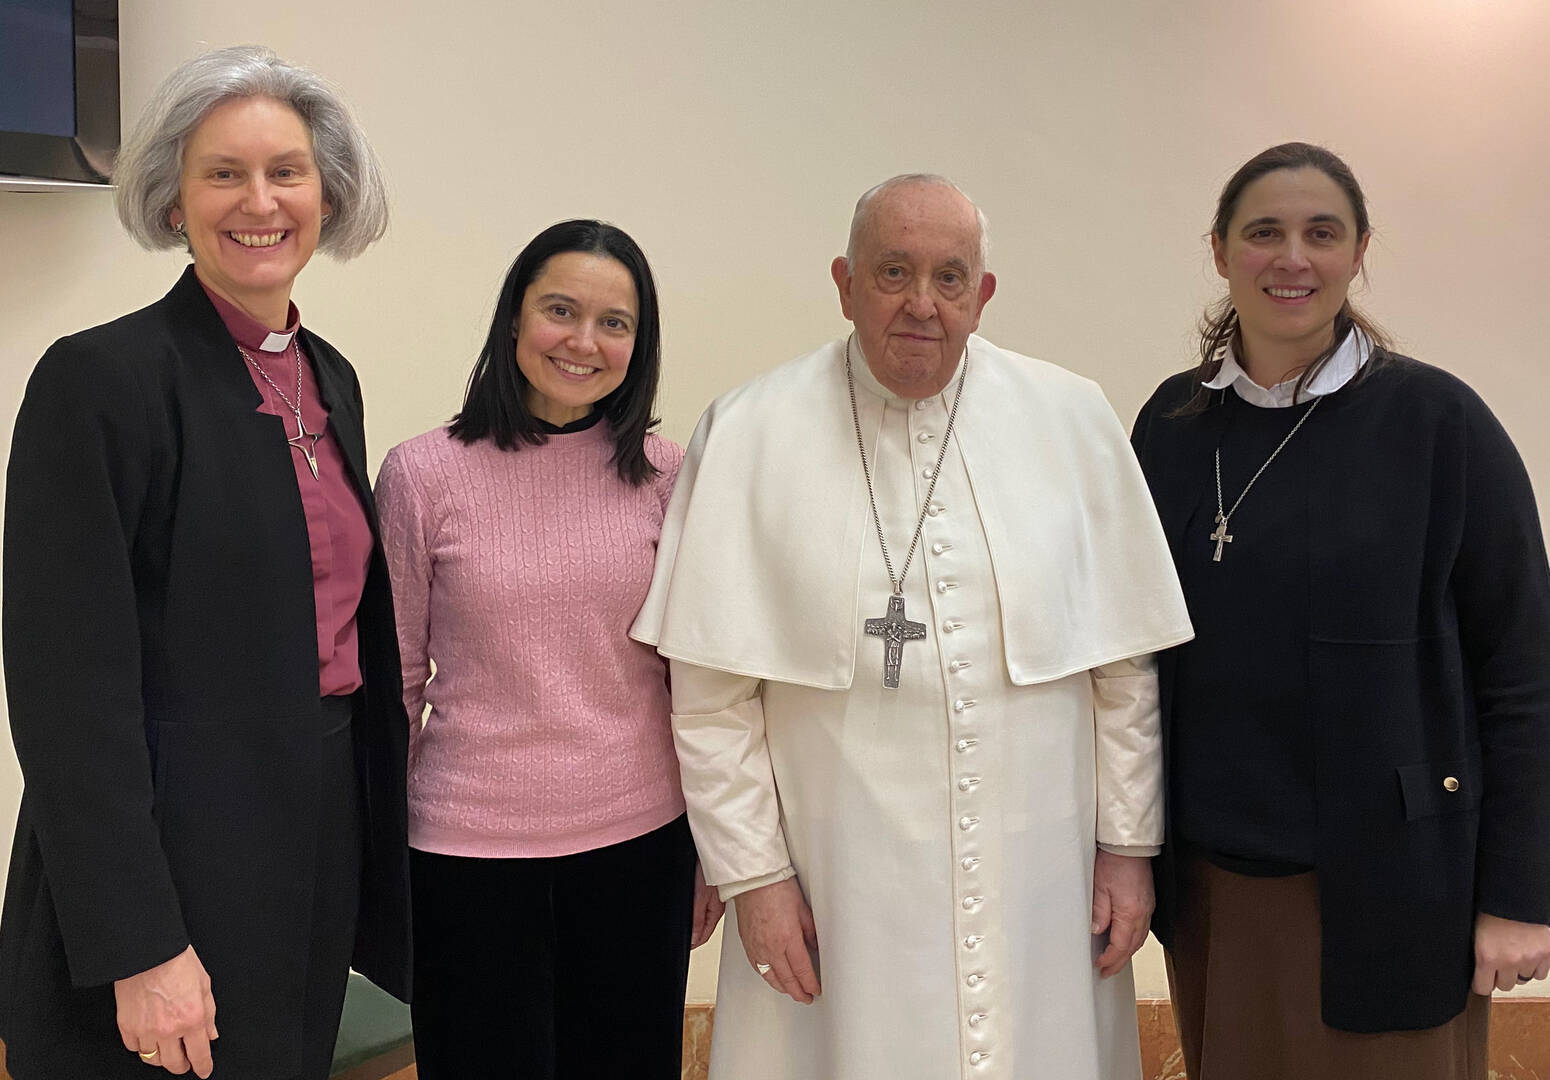 Bishop Jo Bailey Wells, Sister Giuliva Di Beradino, Pope Francis and Sister Linda Pocher at the Vatican on Feb. 5 (Photo provided by 